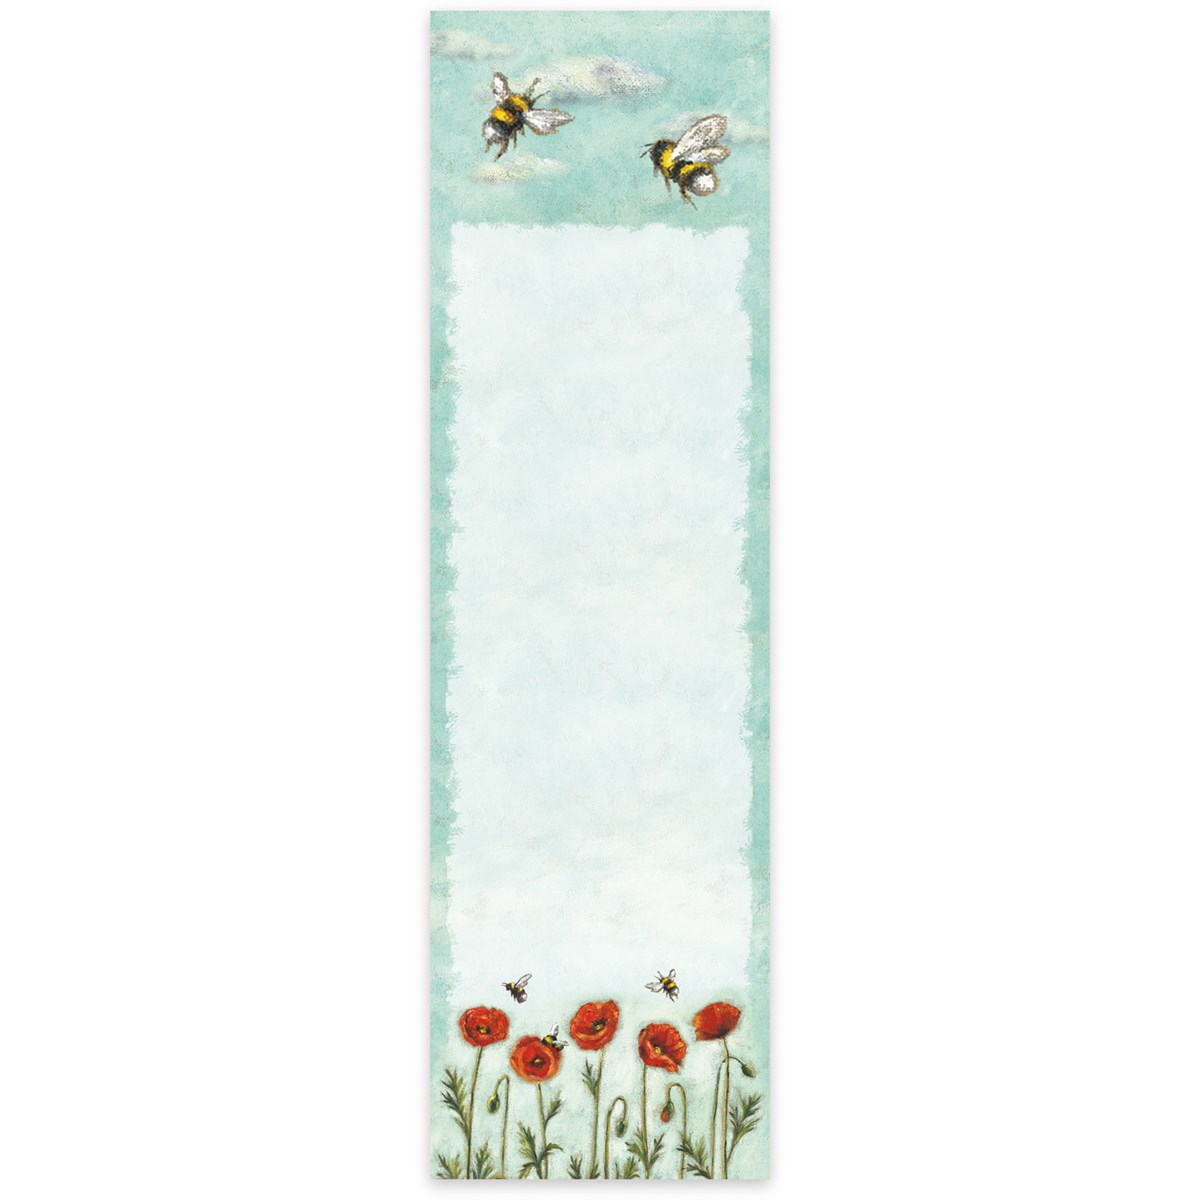 Poppies List Pad - Paper, Magnet